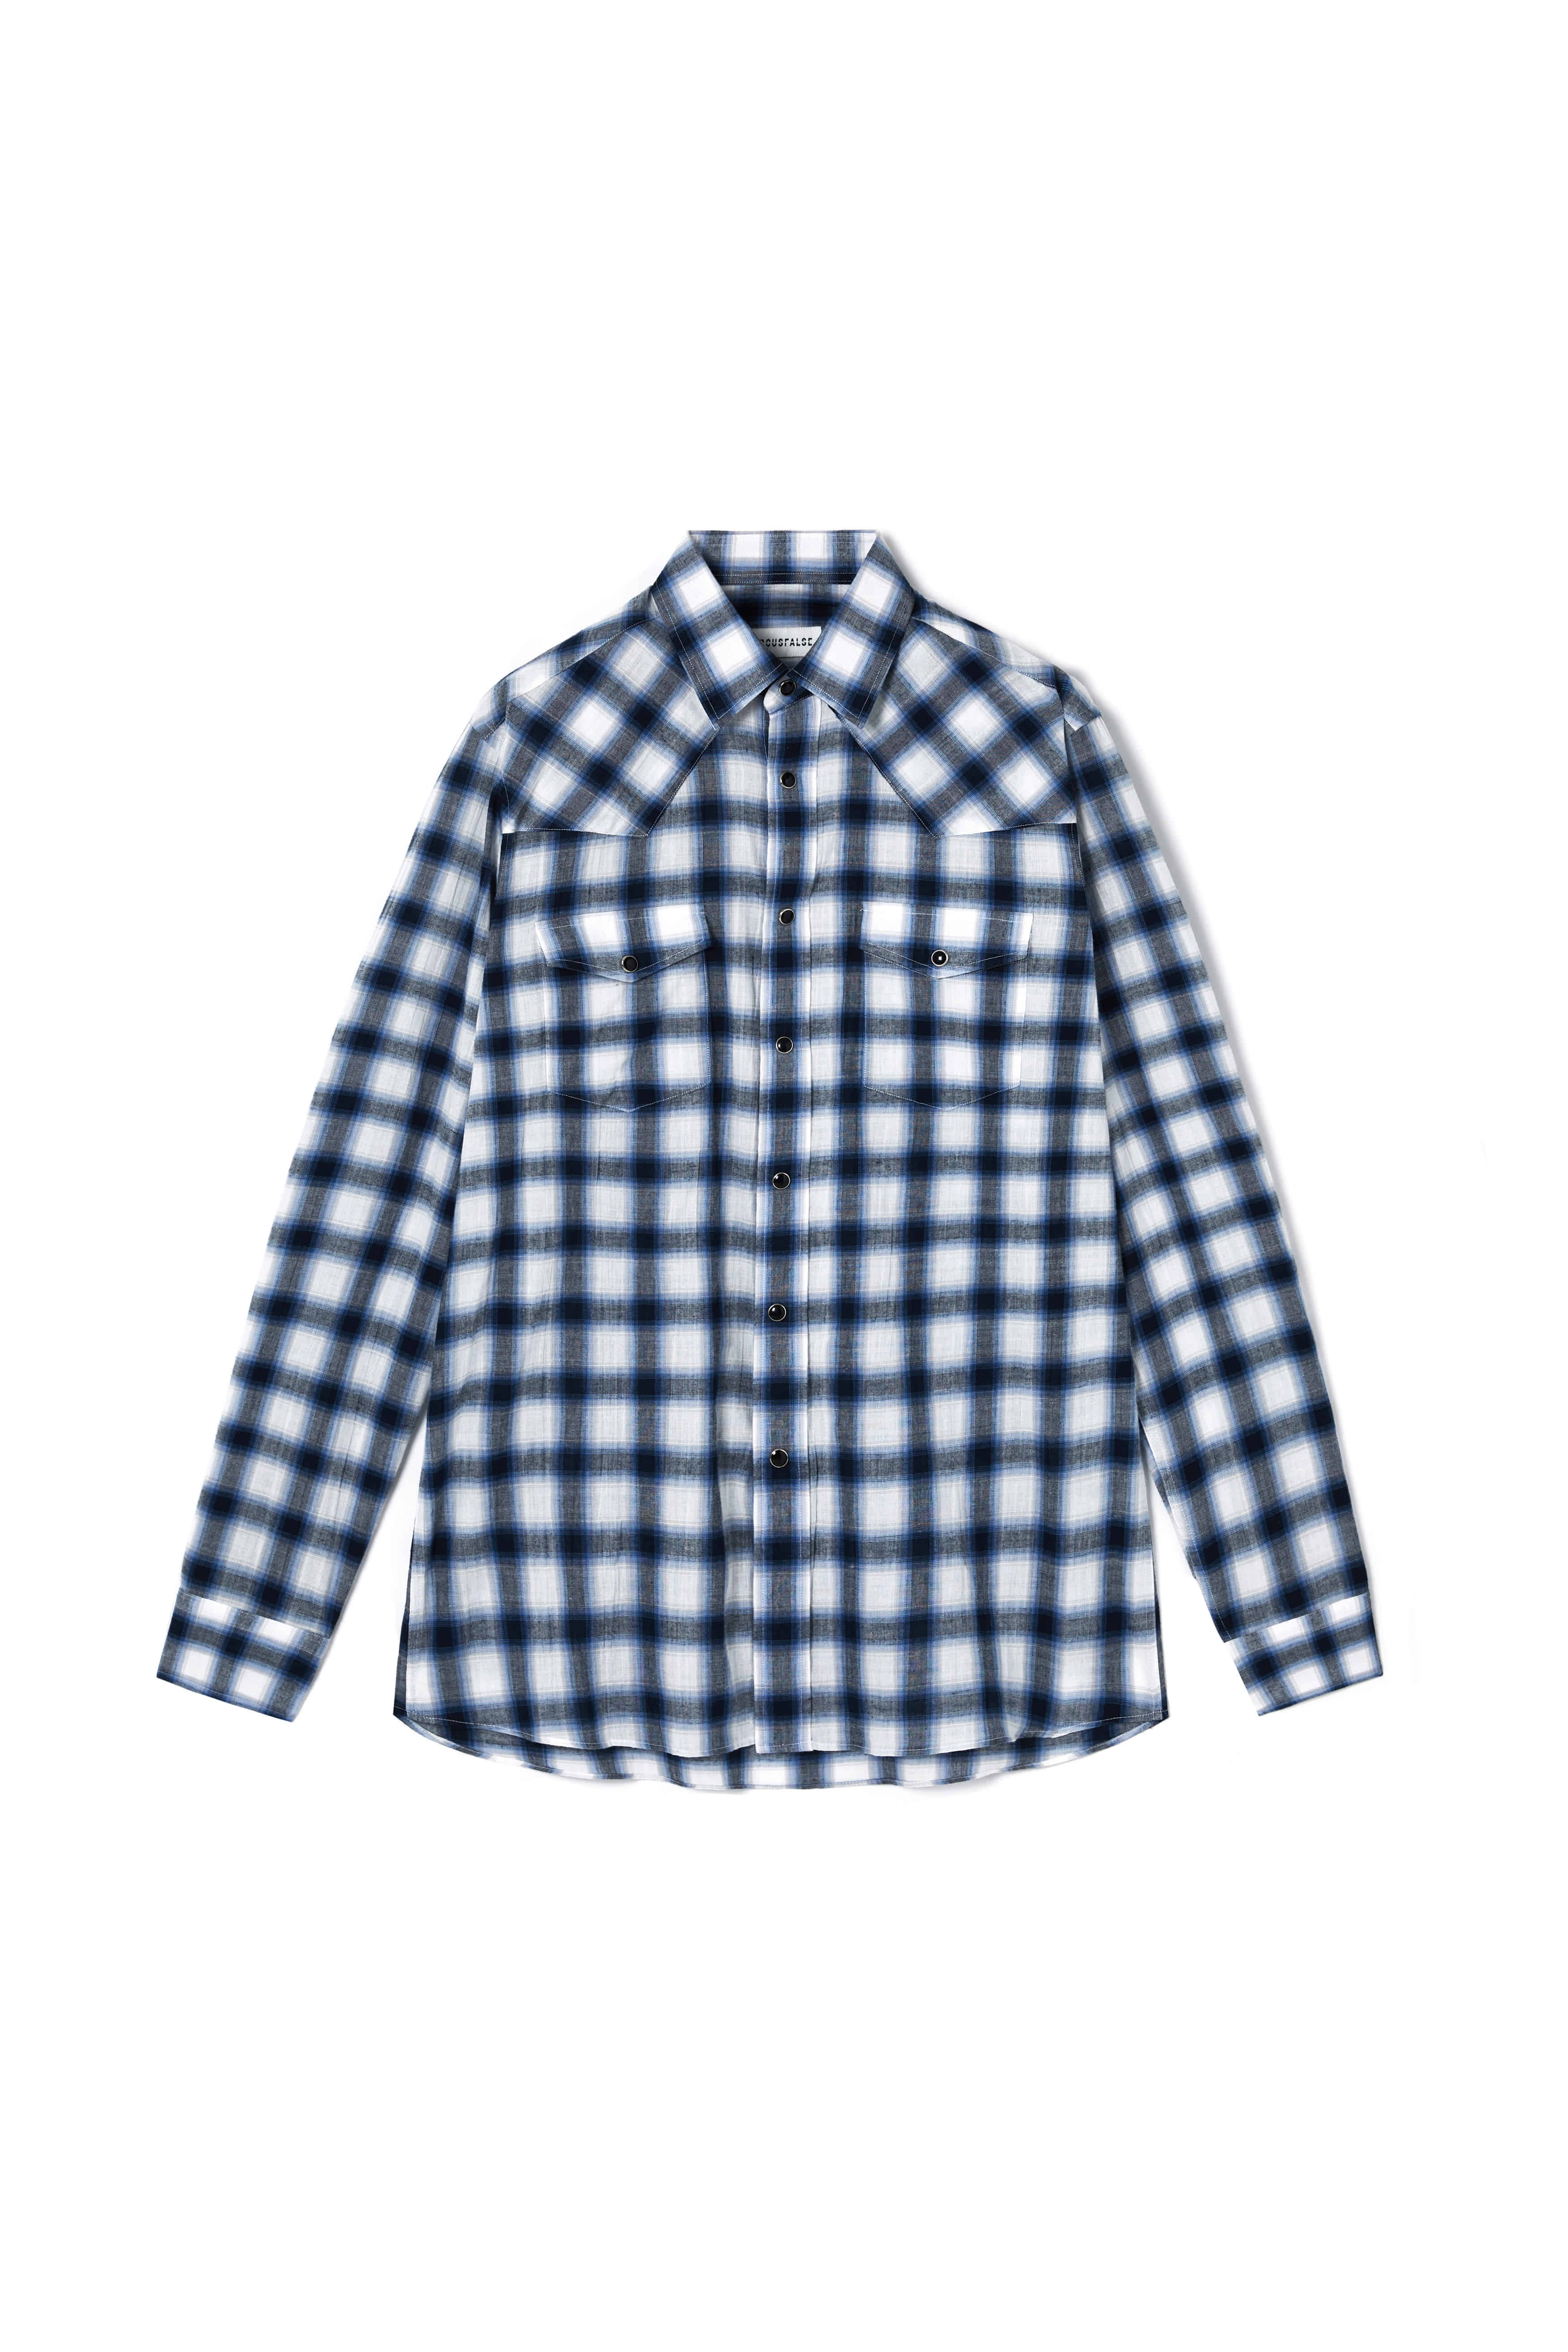 CIRCUSFALSE: WESTERN SHIRTS IN NAVY MULTI CHEKED